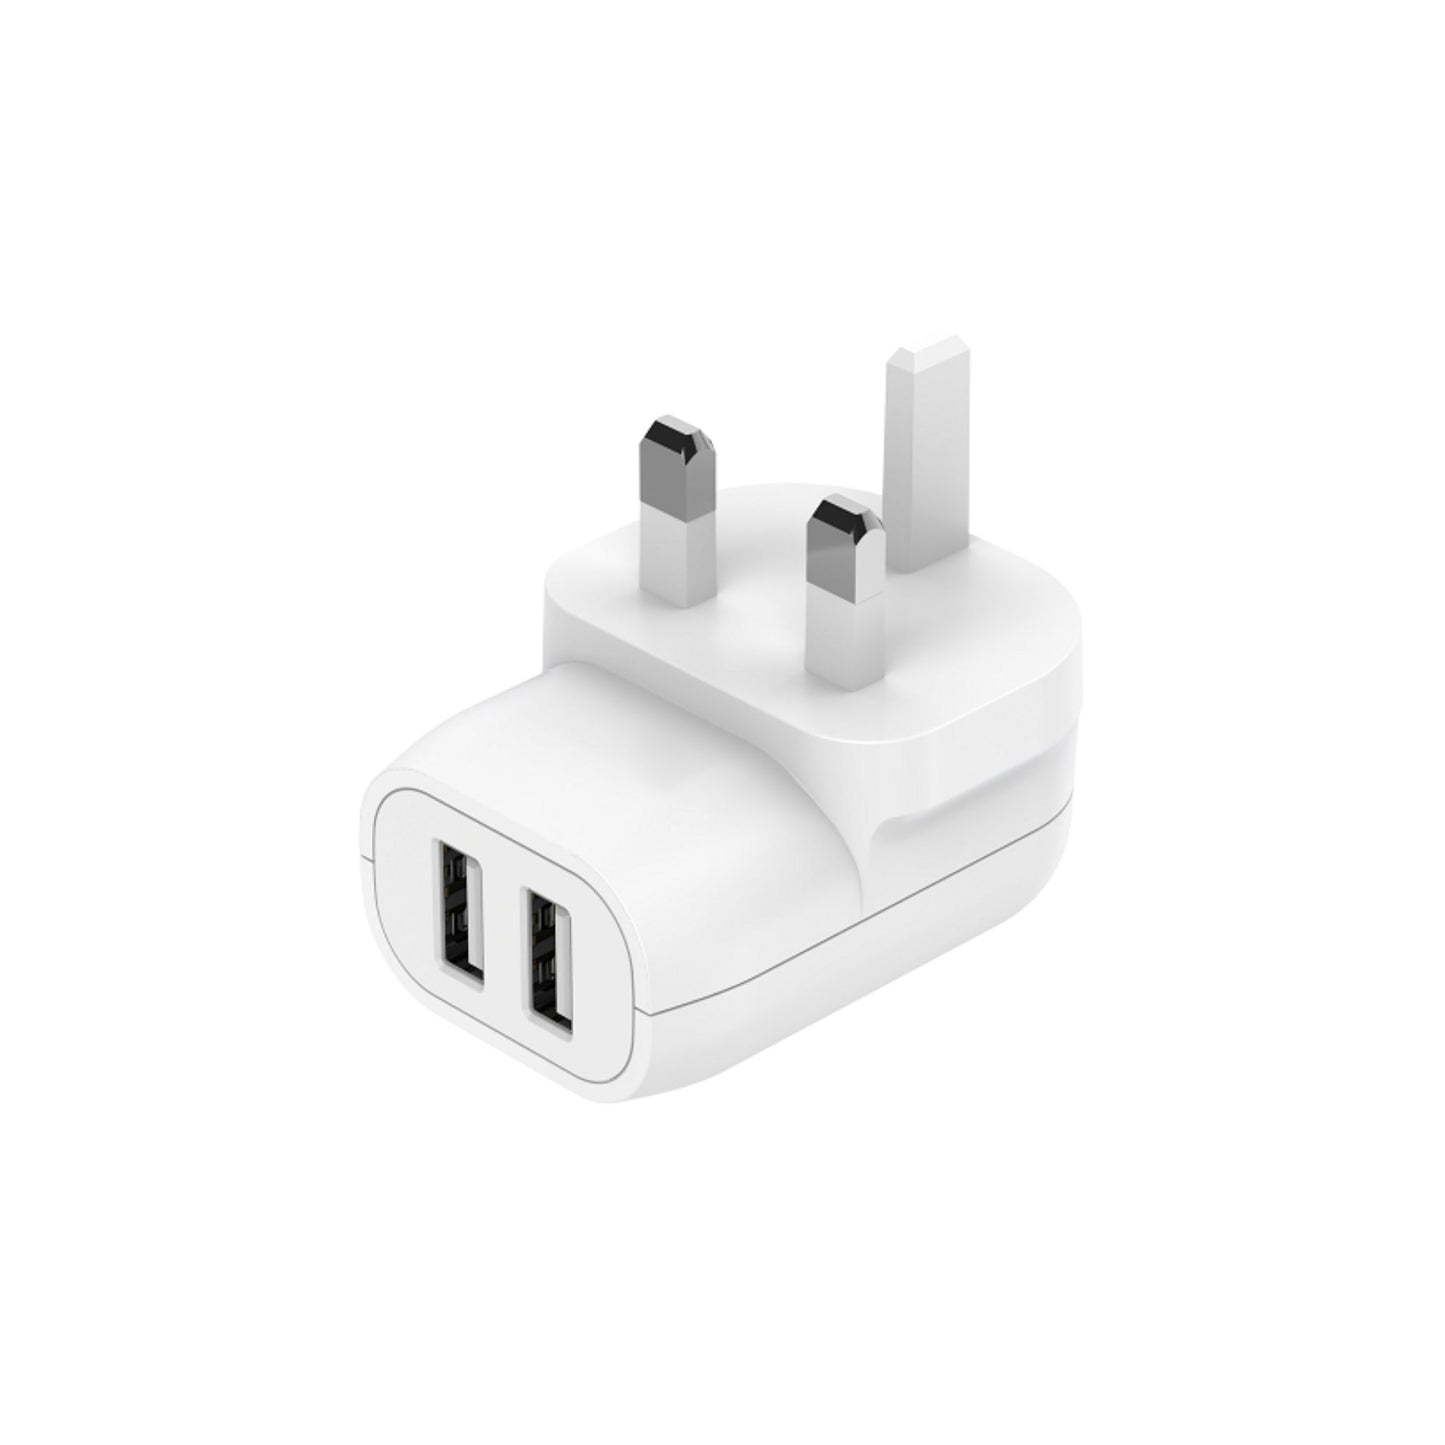 Budi 2 USB Home Charger with 1m Type-C Cable AC339UTW - White